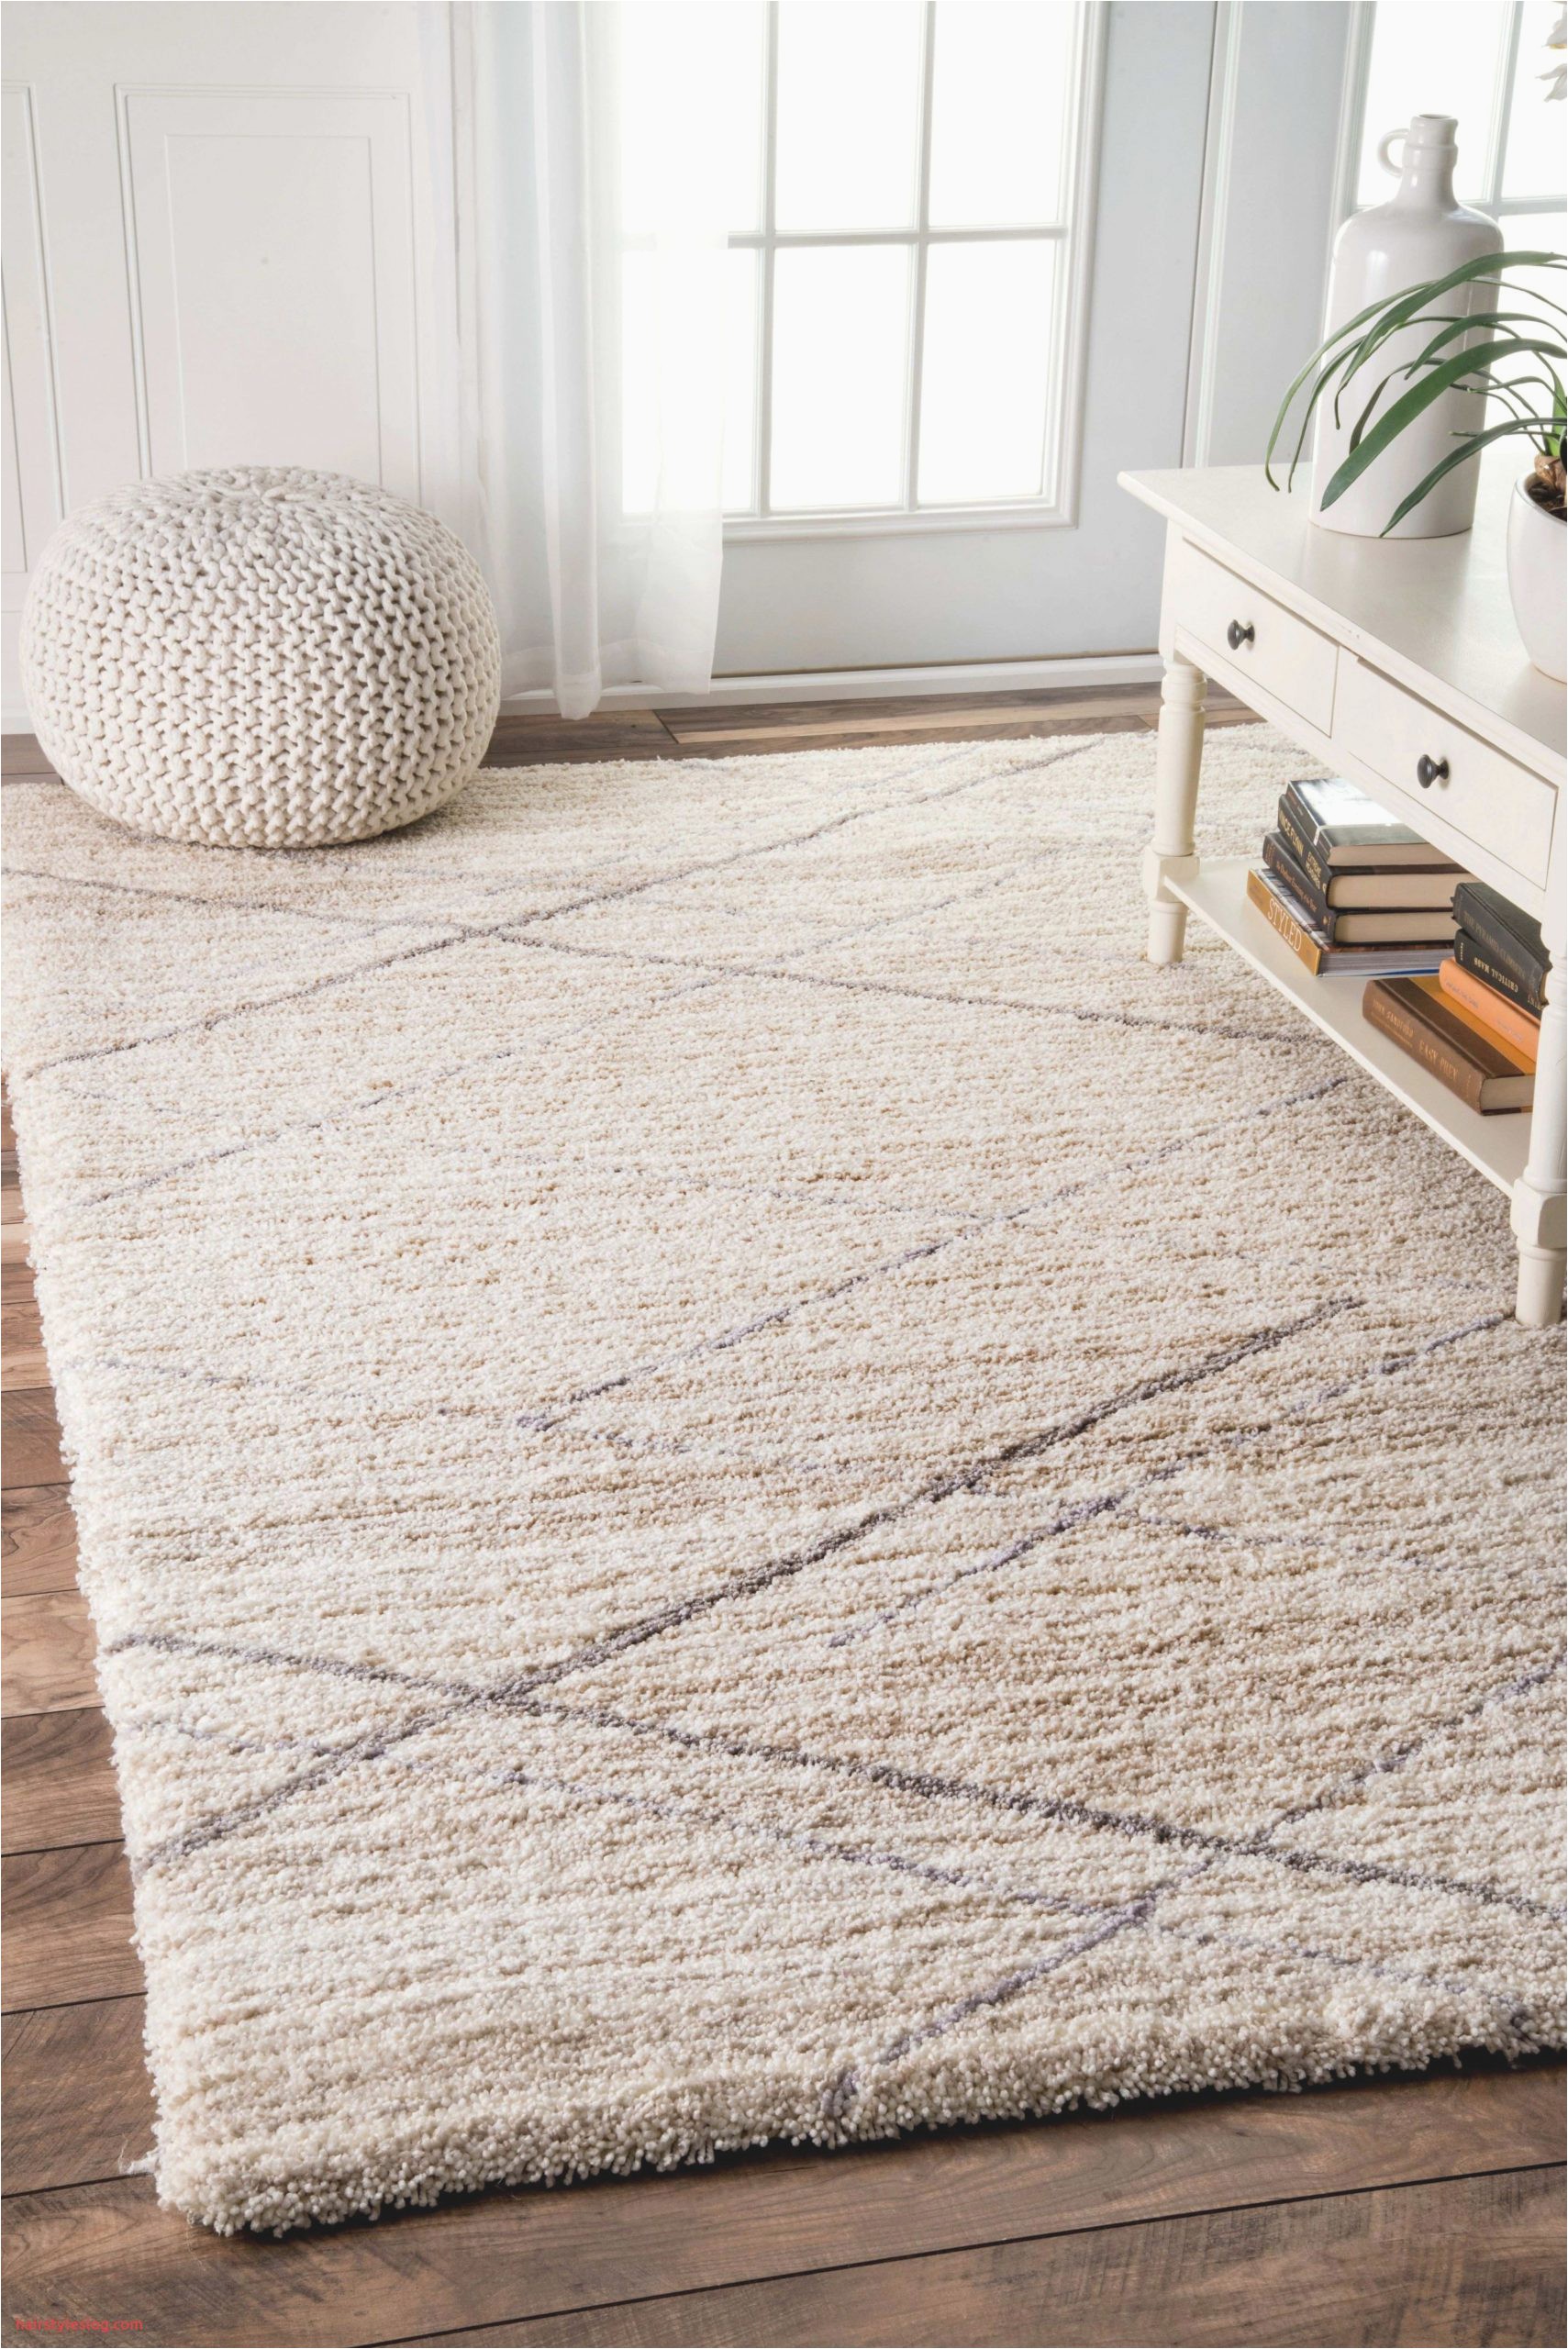 30 new 12x8 area rug which popular this year shag rug within big area rugs for living room scaled